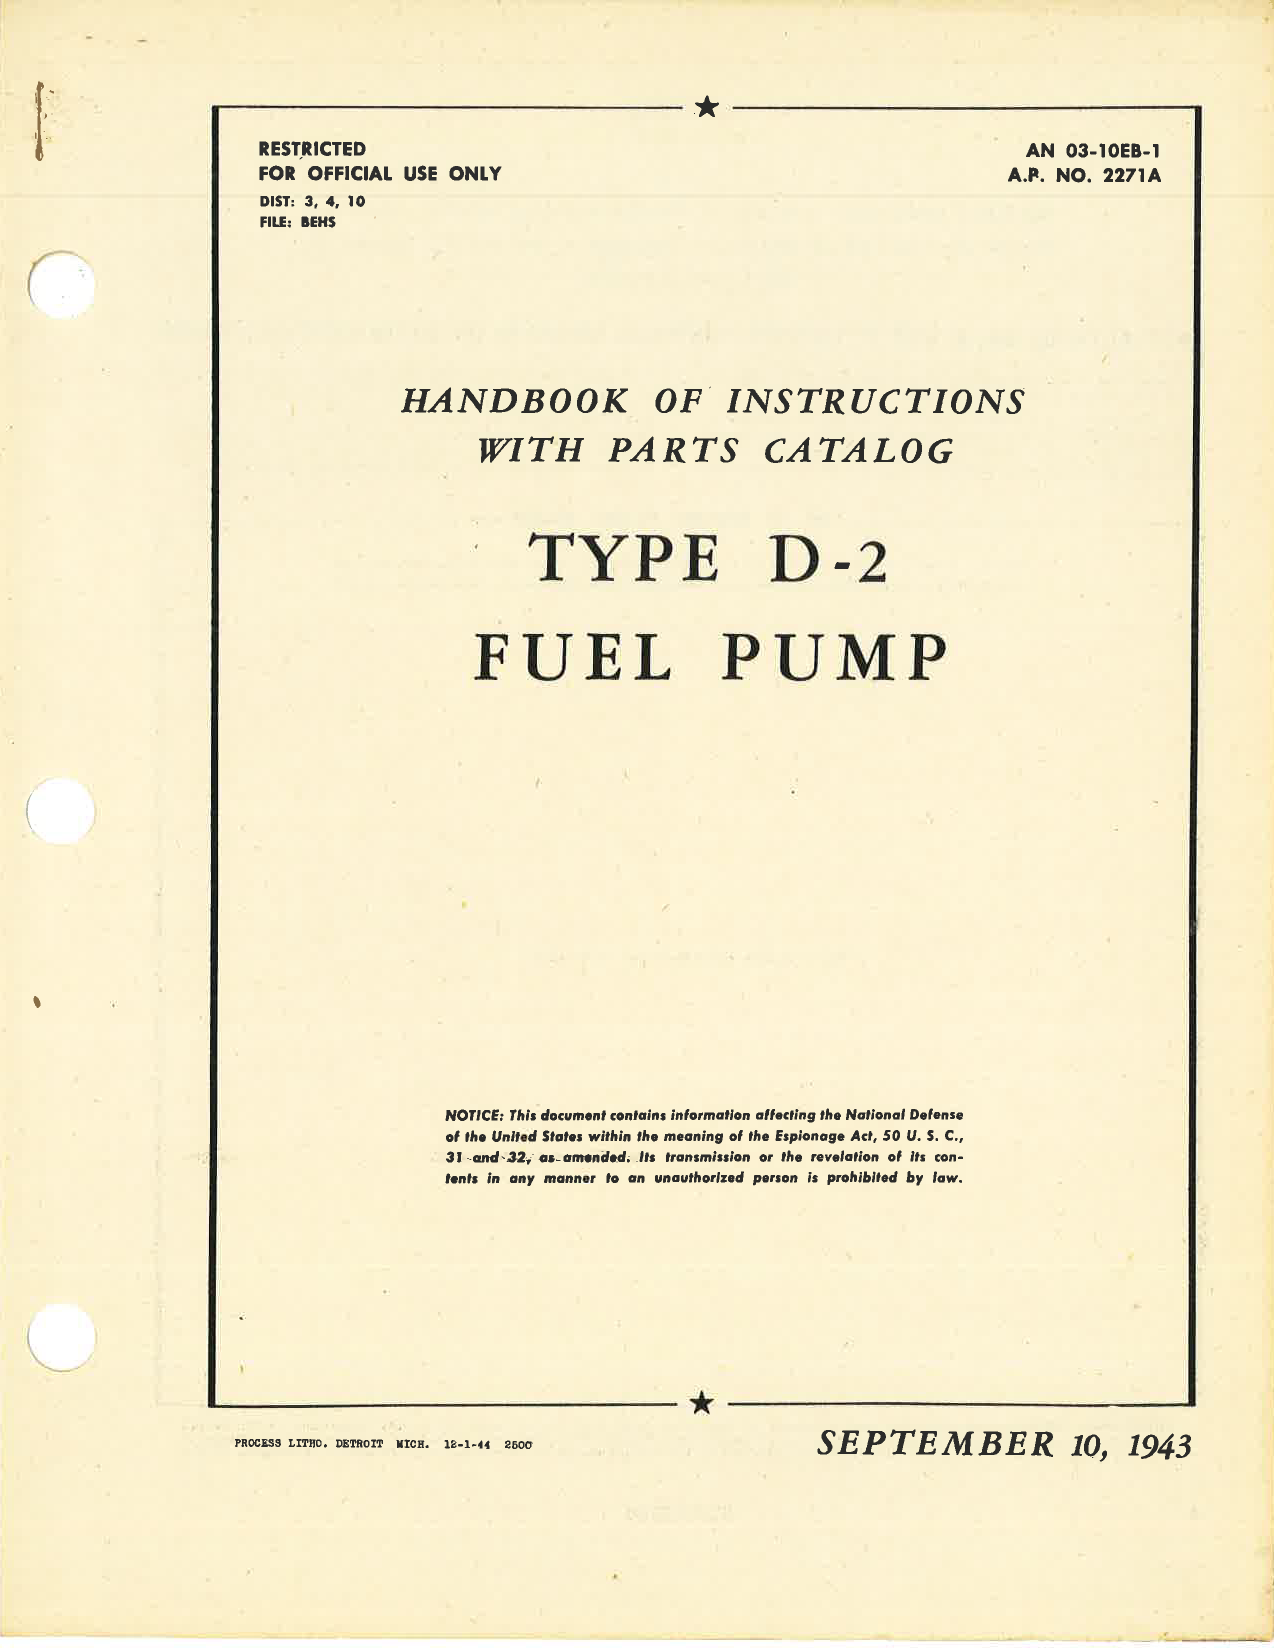 Sample page 1 from AirCorps Library document: Handbook of Instructions with Parts Catalog for Type D-2 Fuel Pump